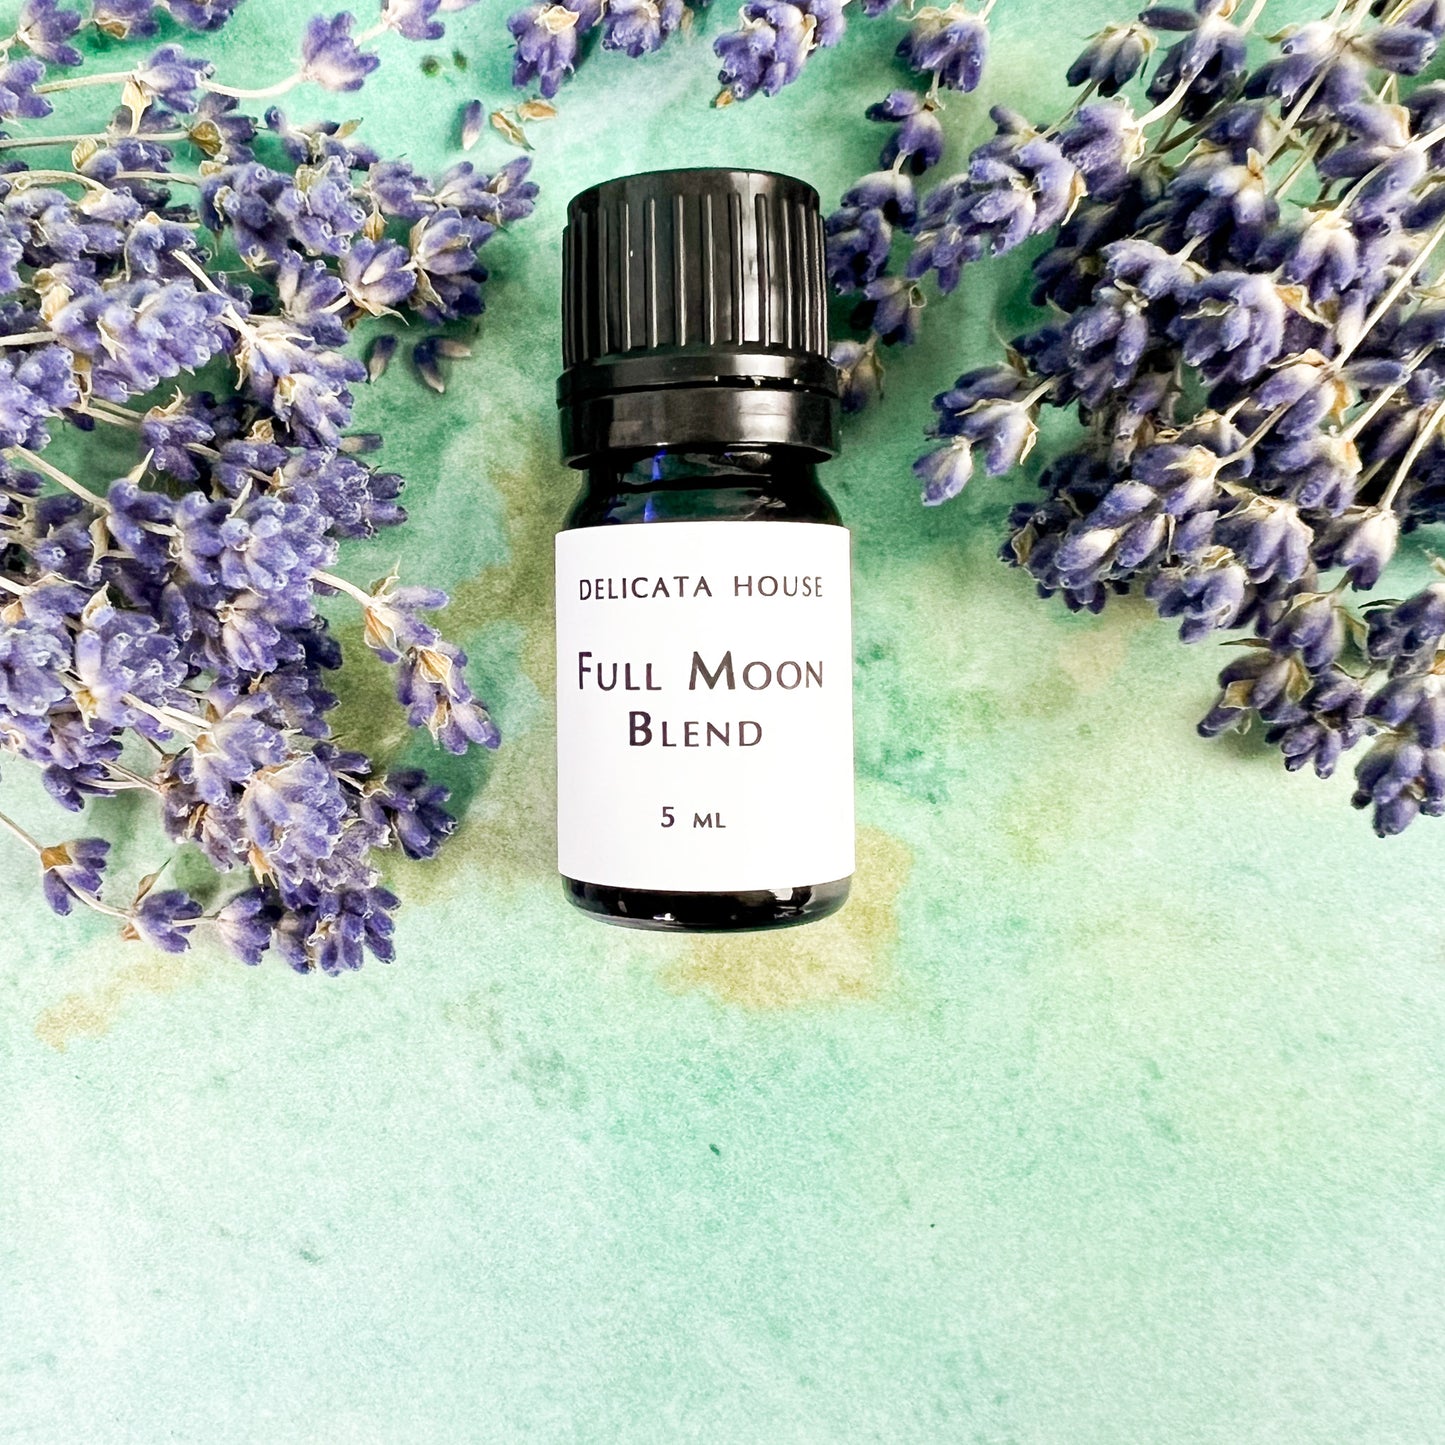 Aromatherapy Blend - Full Moon Diffuser Blend - Aromatherapy for Full Moon Ritual - Full Moon Aromatherapy - Moon Lover's Gift - Gift for Self-Care